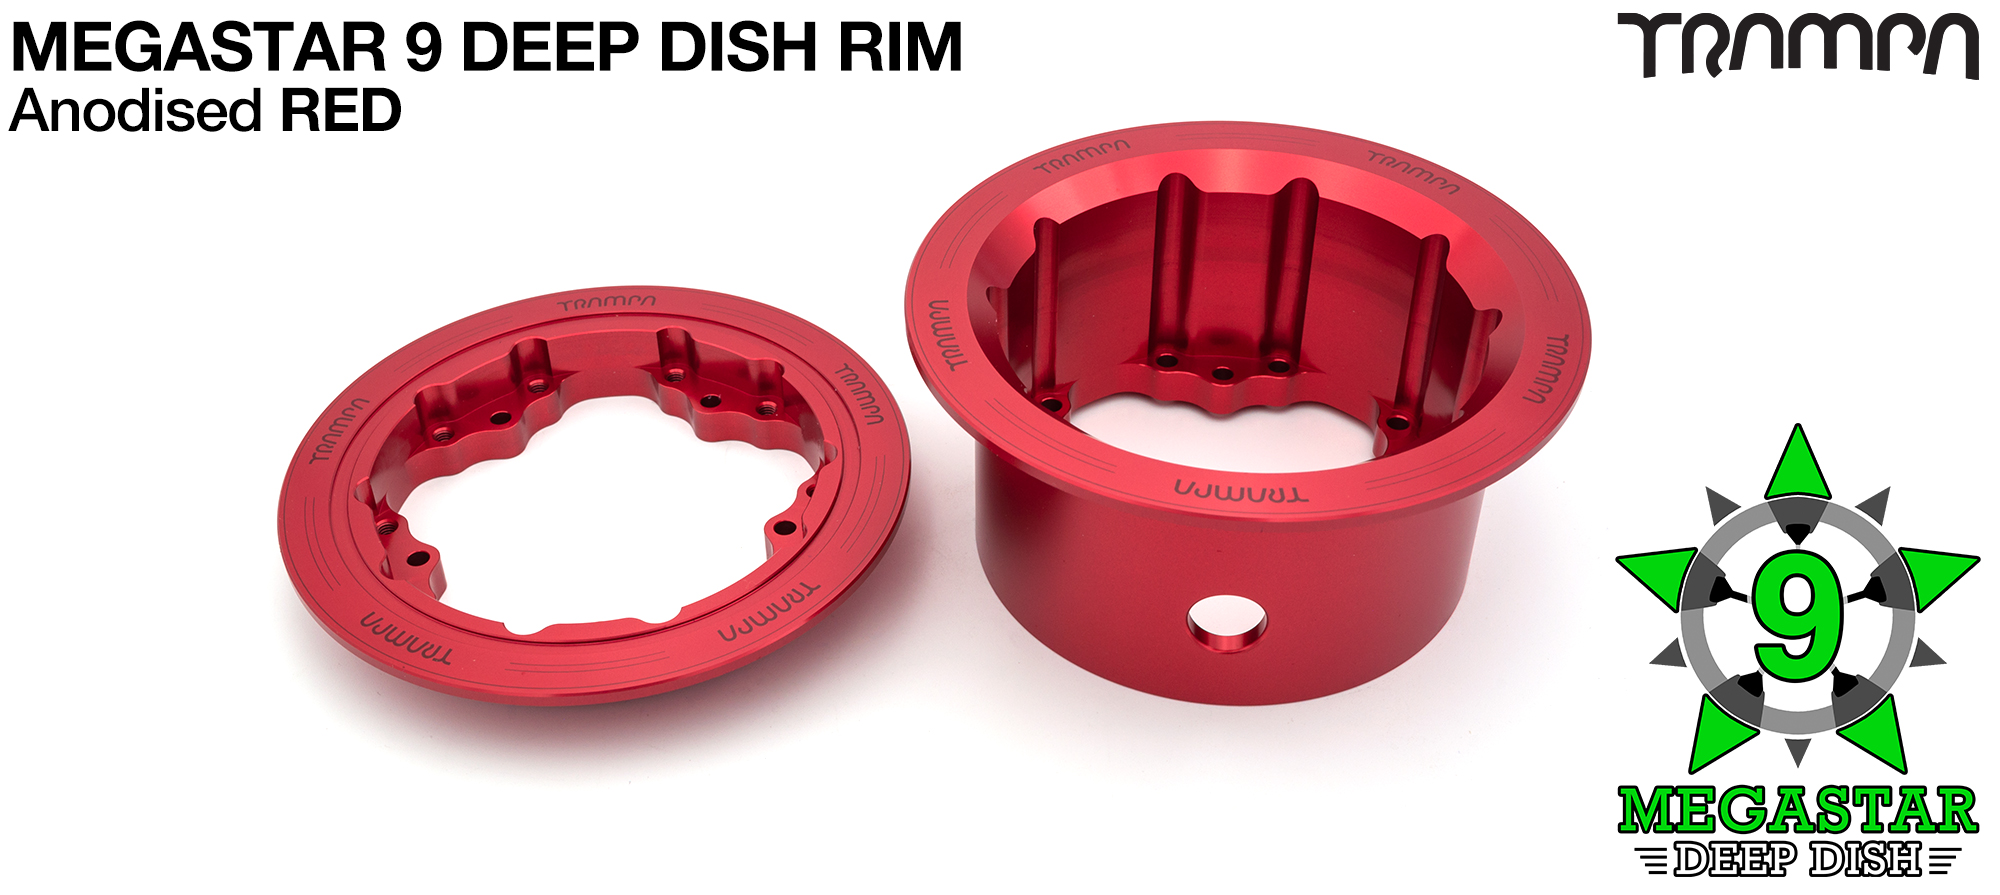 MEGASTAR 9 DD Rims Measure 3.75/4x 3 Inch. The Bearings are positioned DEEP-DISH OFF-SET & accept 3.75 & 4 Inch Rim Tyres - RED